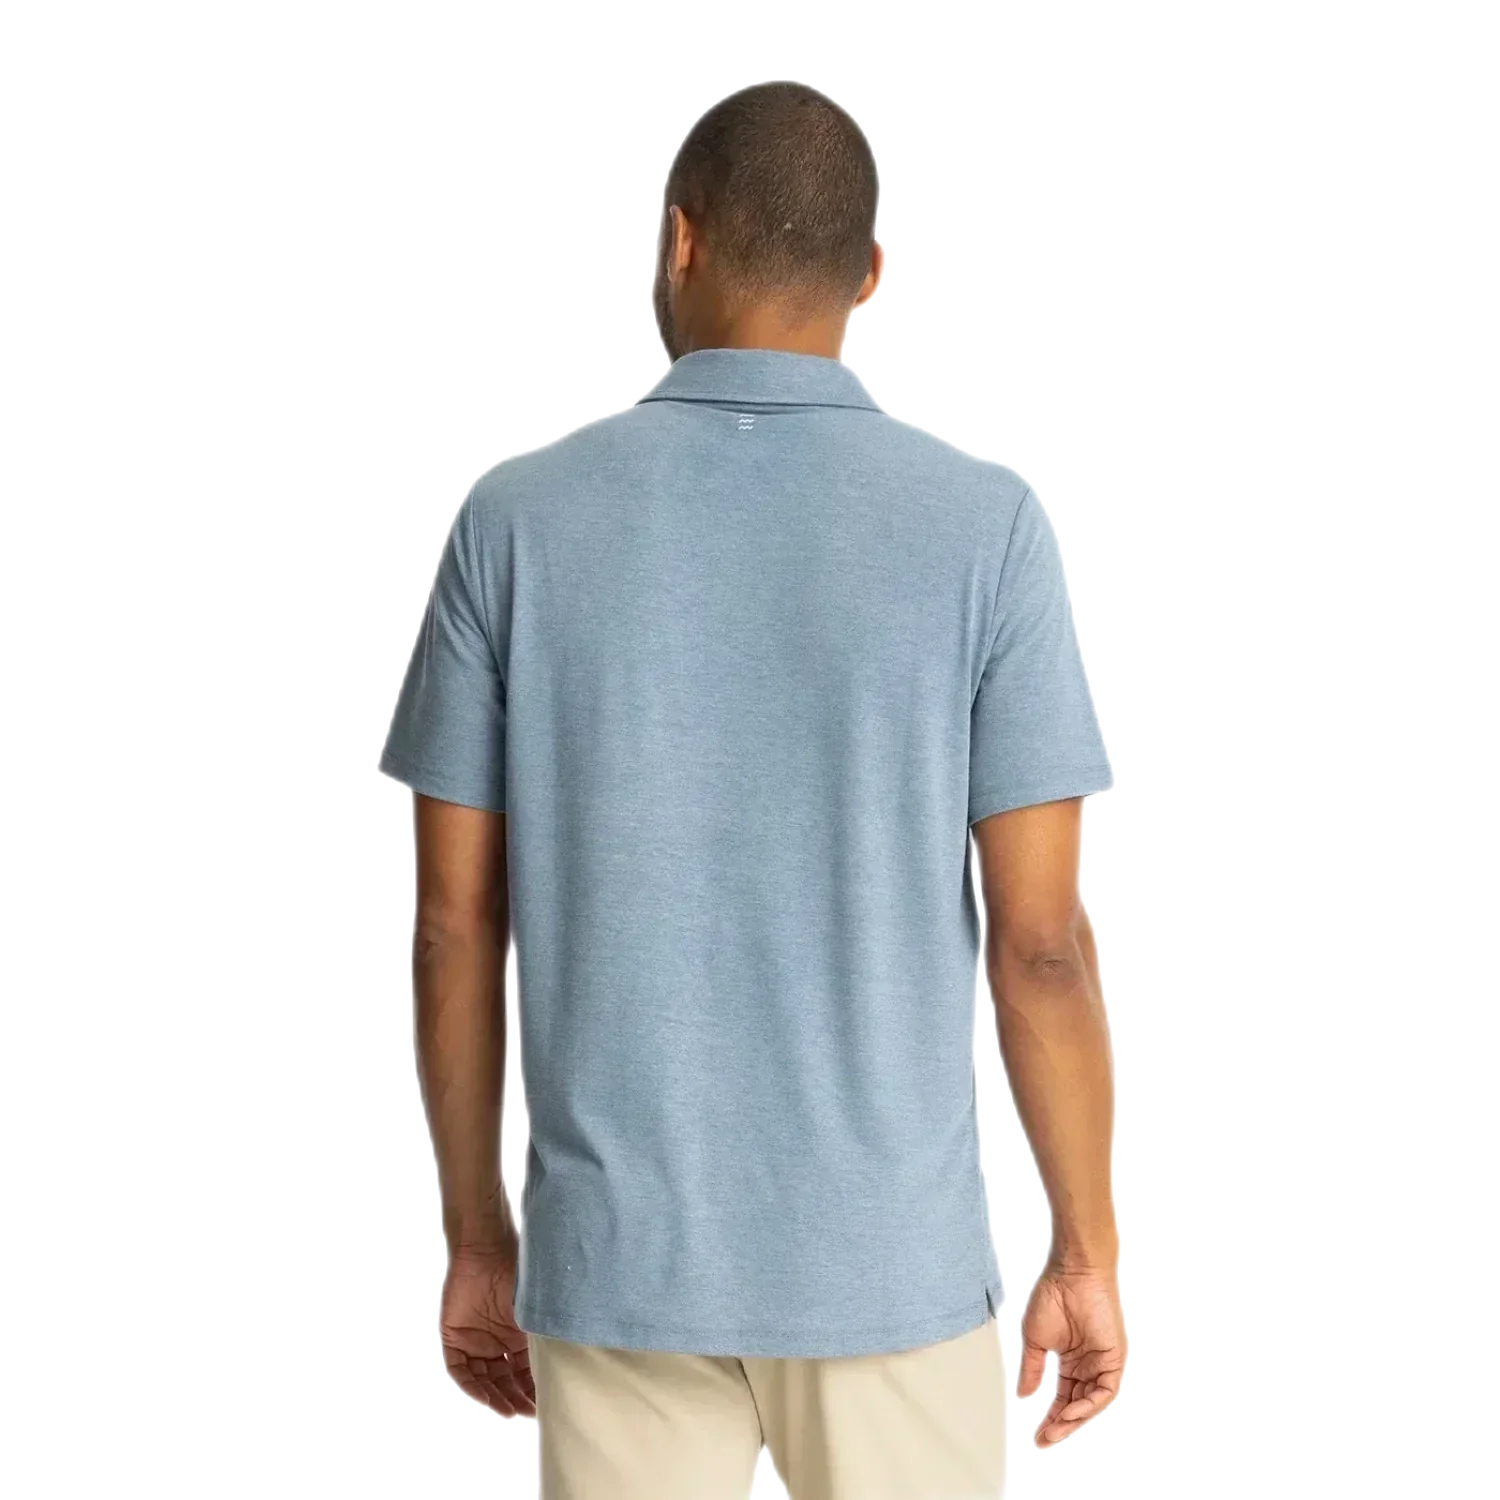 Free Fly Apparel 01. MENS APPAREL - MENS SS SHIRTS - MENS SS POLO Men's Bamboo Flex Polo II HEATHER DEEPWATER